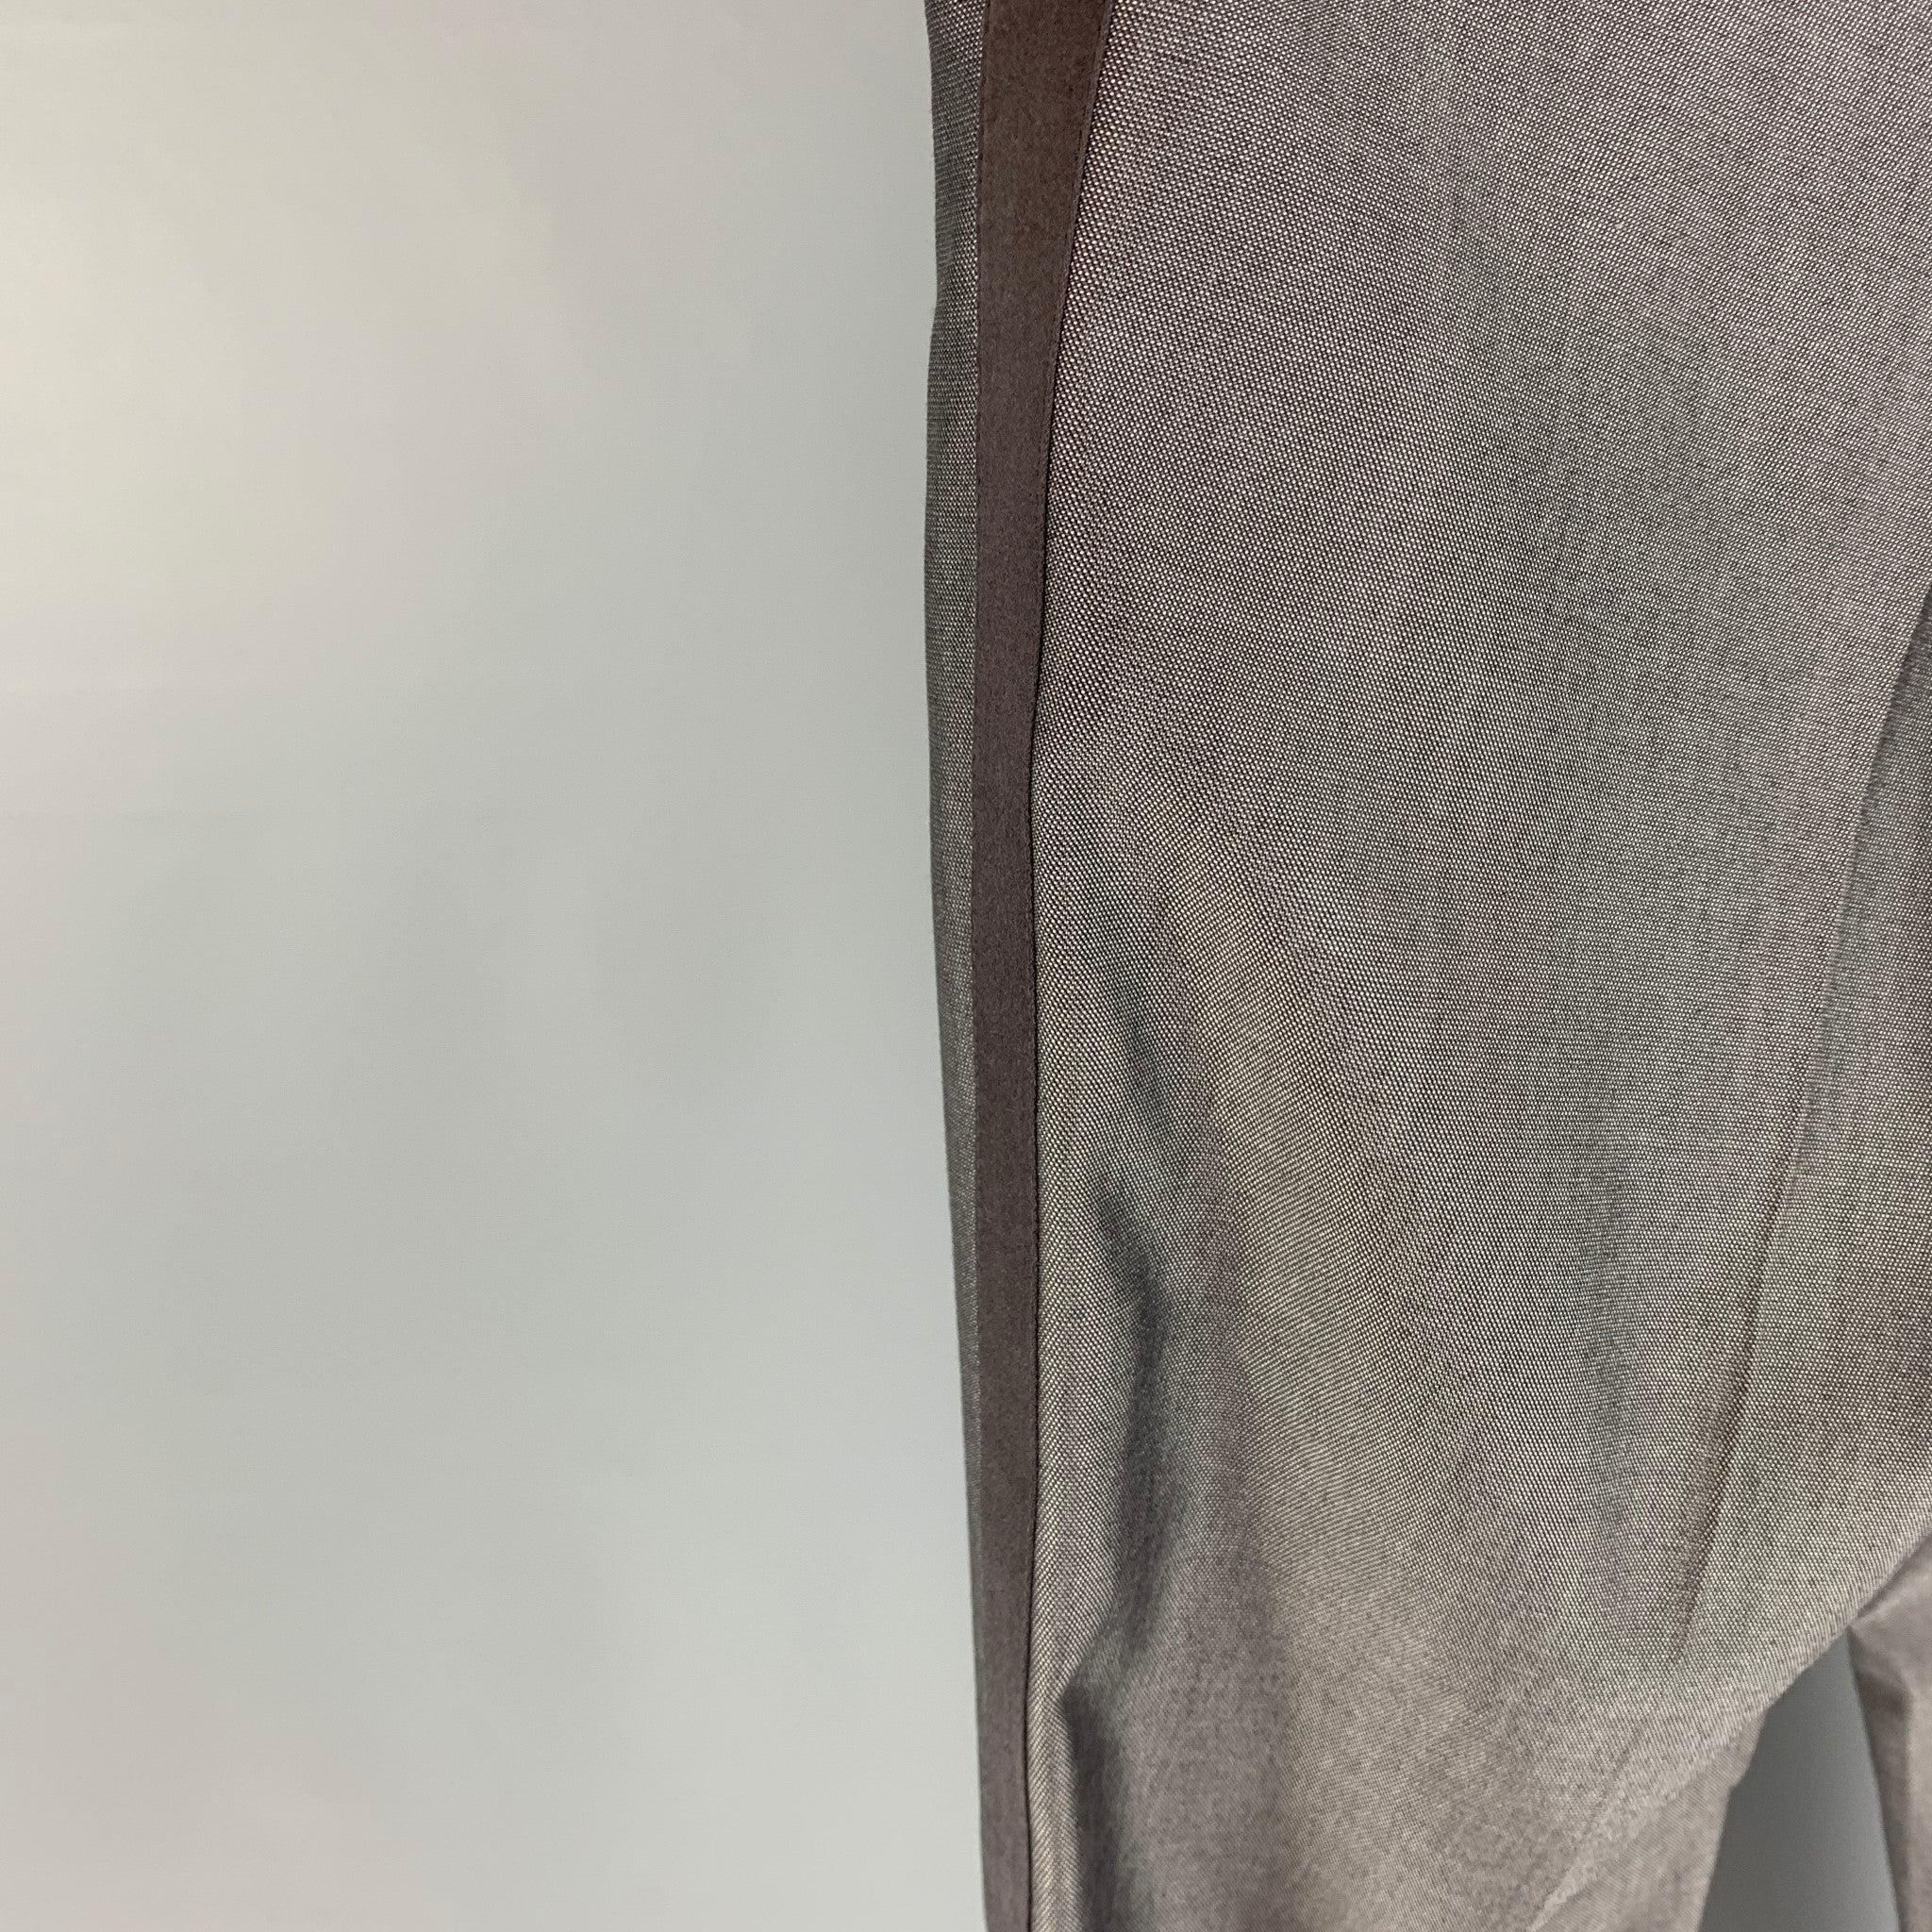 DOLCE & GABBANA Size 32 Grey Wool Silk Tuxedo Dress Pants In Good Condition For Sale In San Francisco, CA